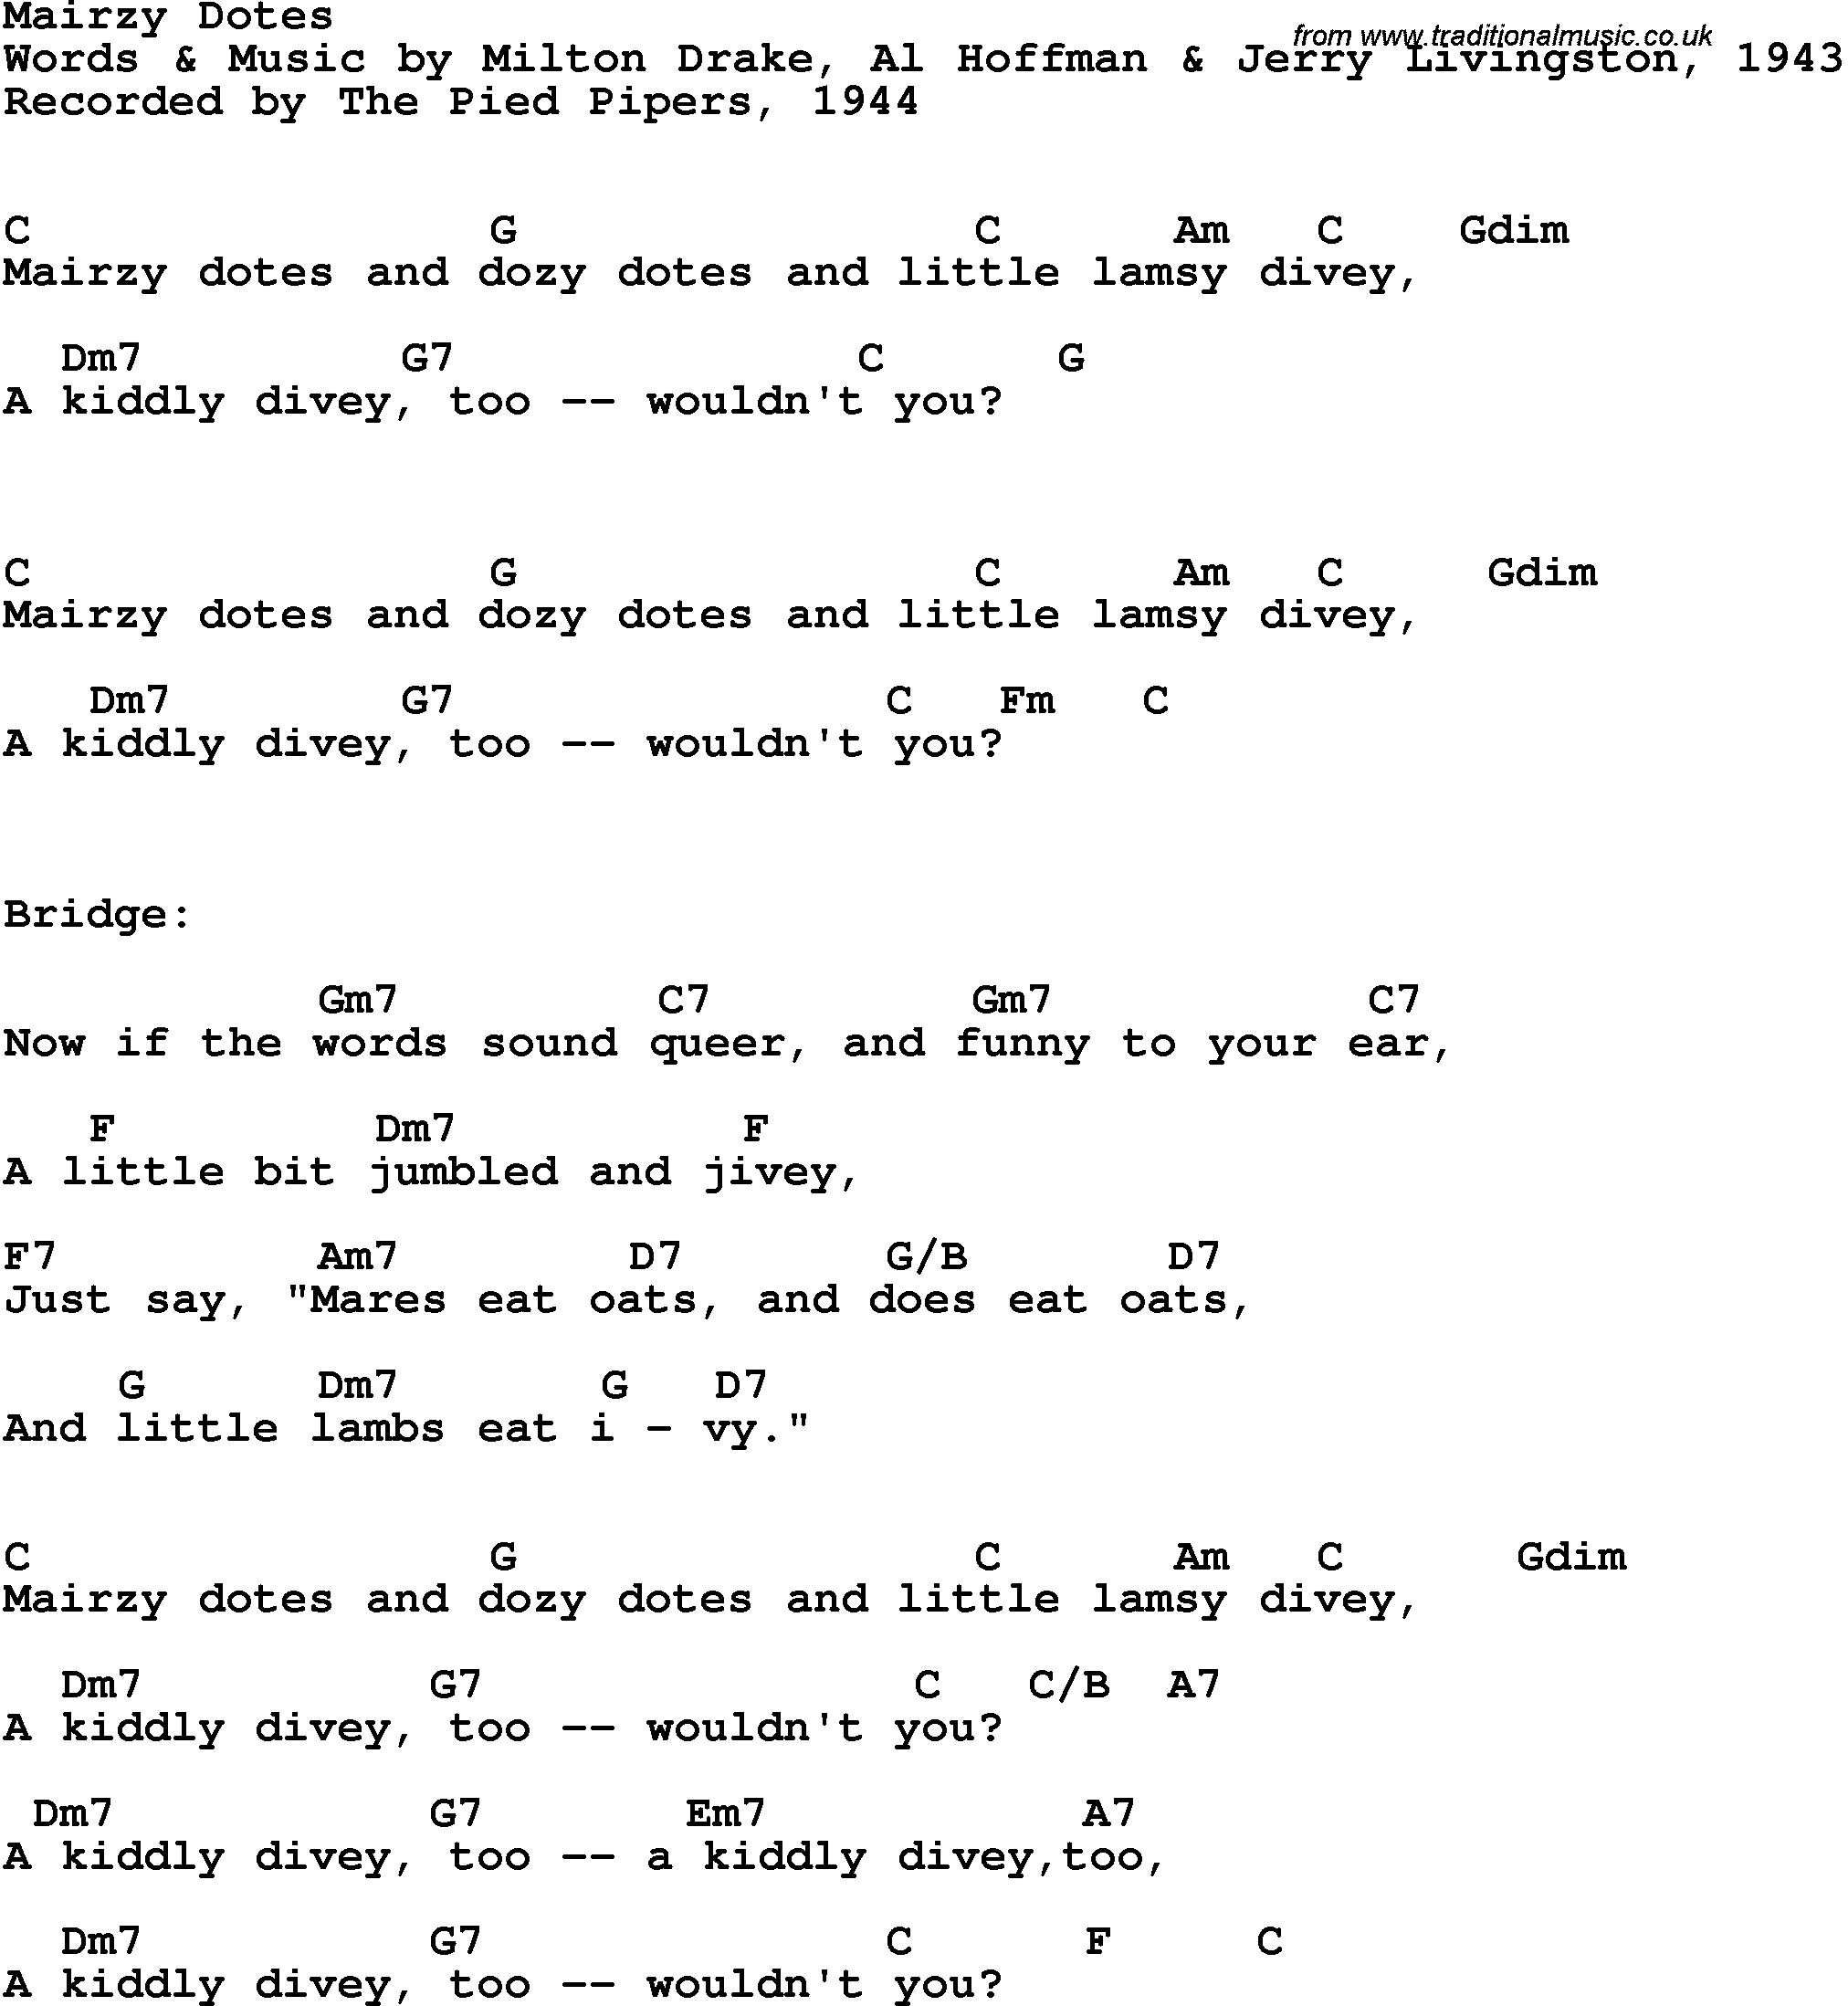 Song Lyrics with guitar chords for Mairzy Dotes - The Pied Pipers, 1944